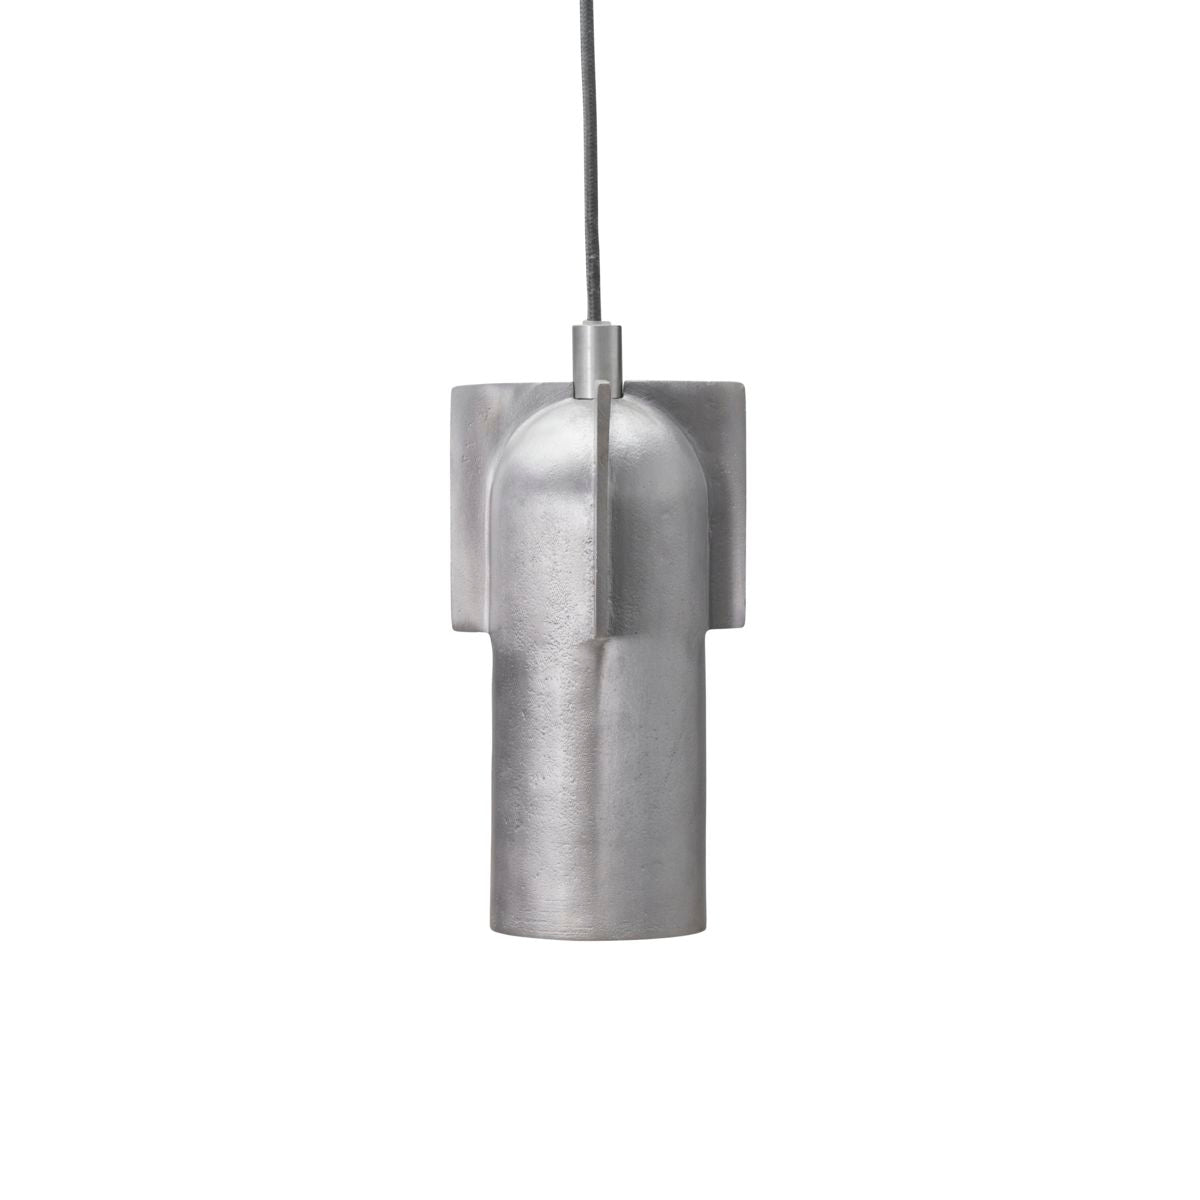 Lamp - Akola Large - Brushed Silver Lamp by House Doctor